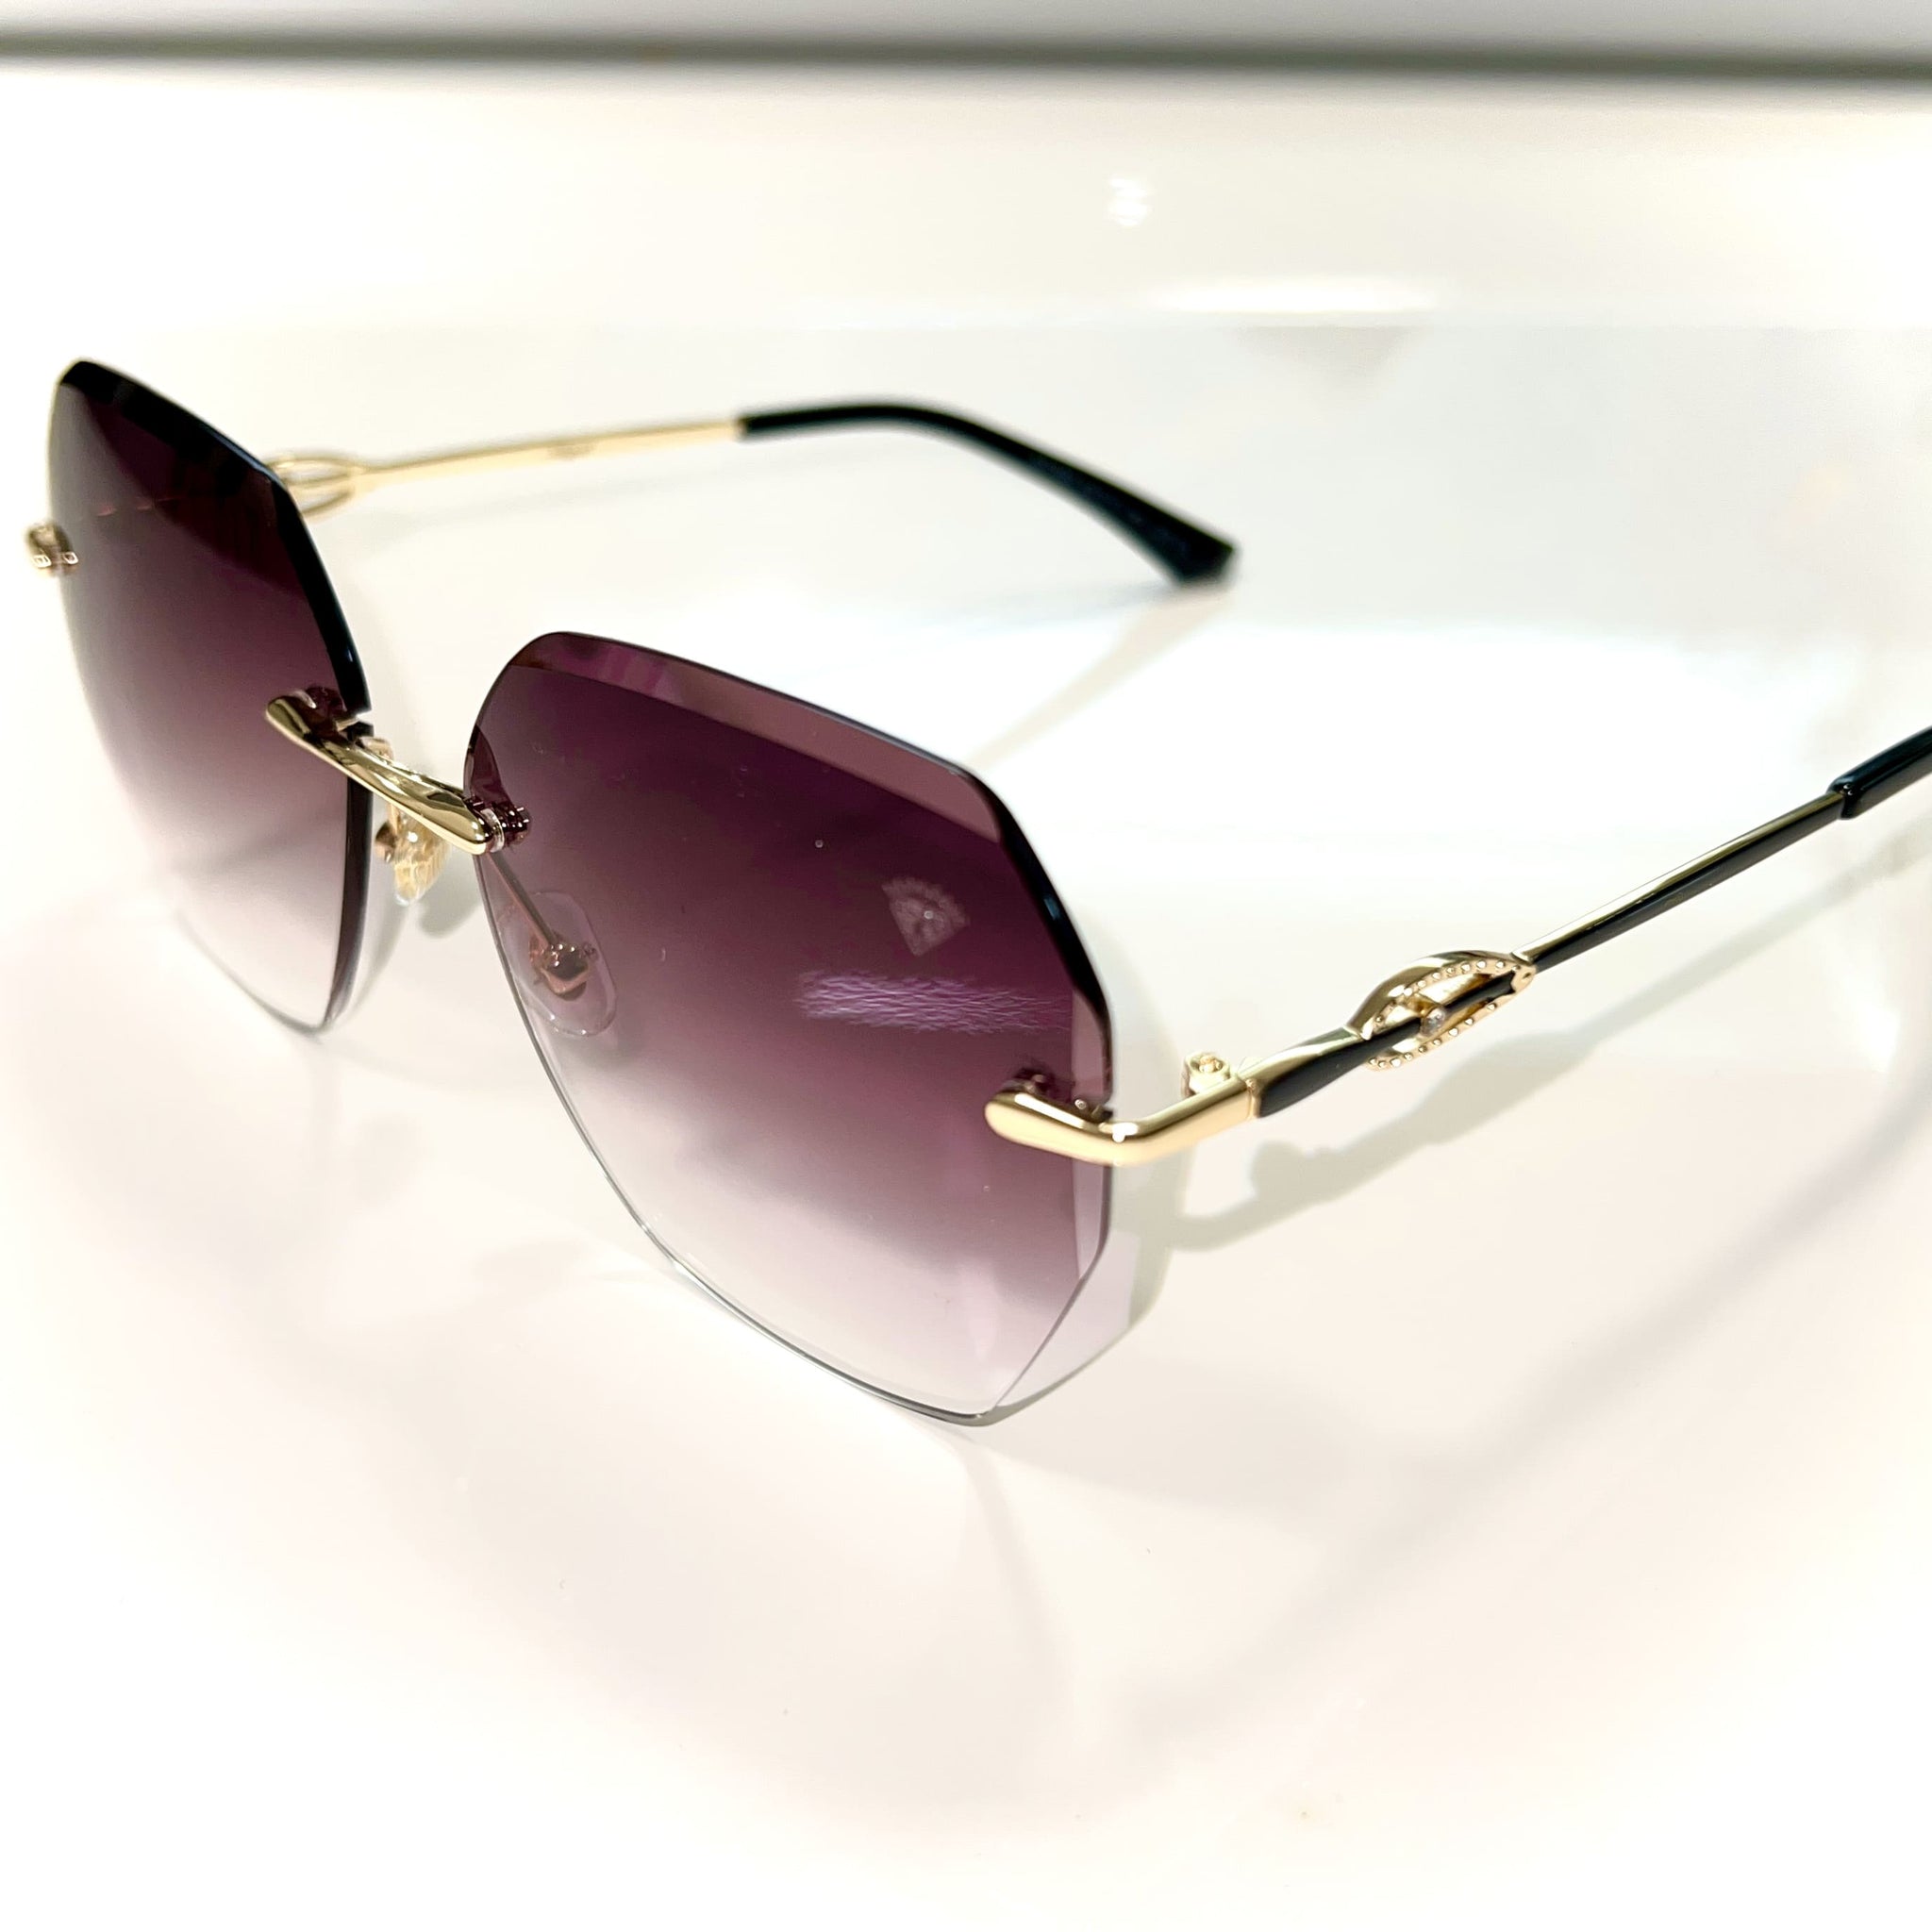 Egyptian Eye Glasses - "For Her" - 14 carat gold plated - Bordeaux Shade- Sehgal Glasses